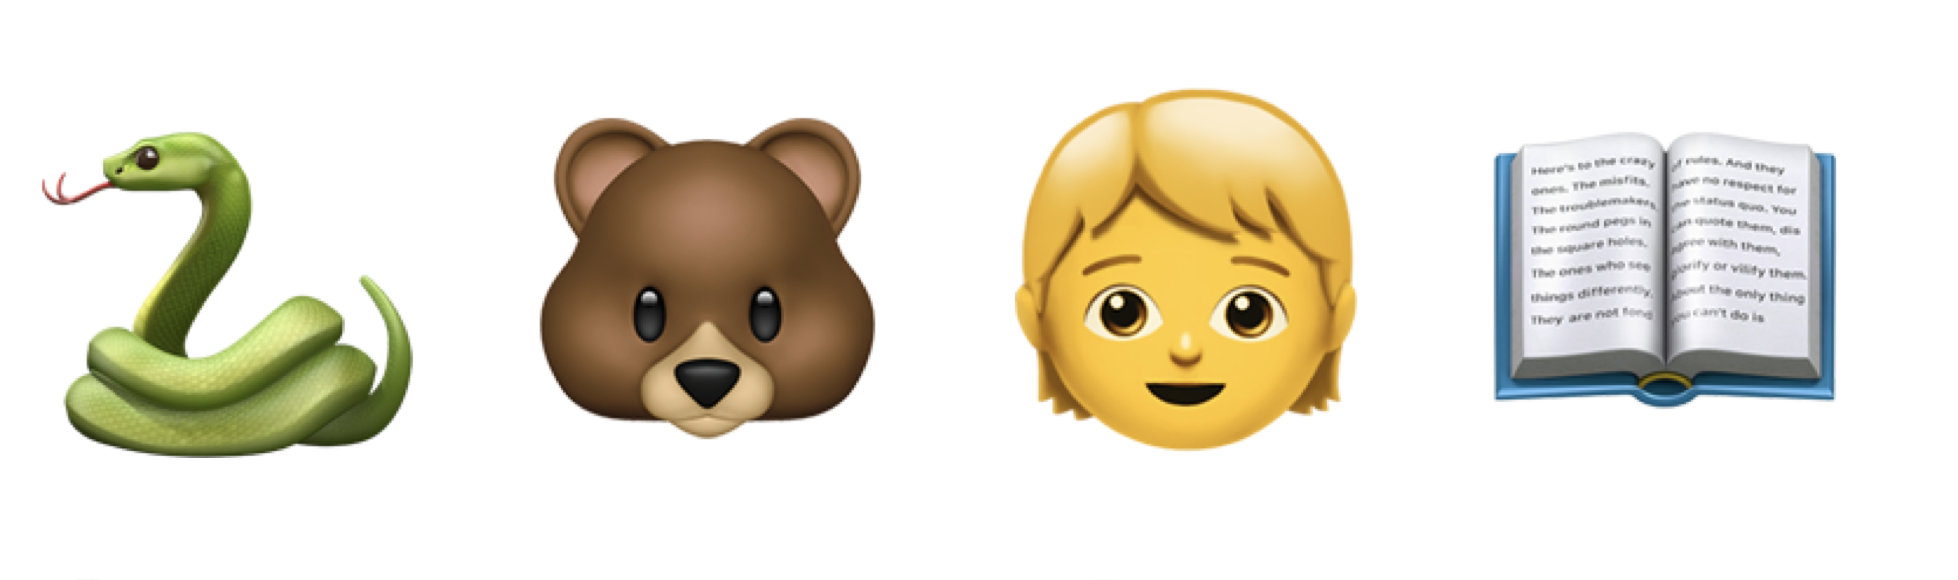 Quiz: Guess Disney Movie From These Emojis - LaughingPlace.com